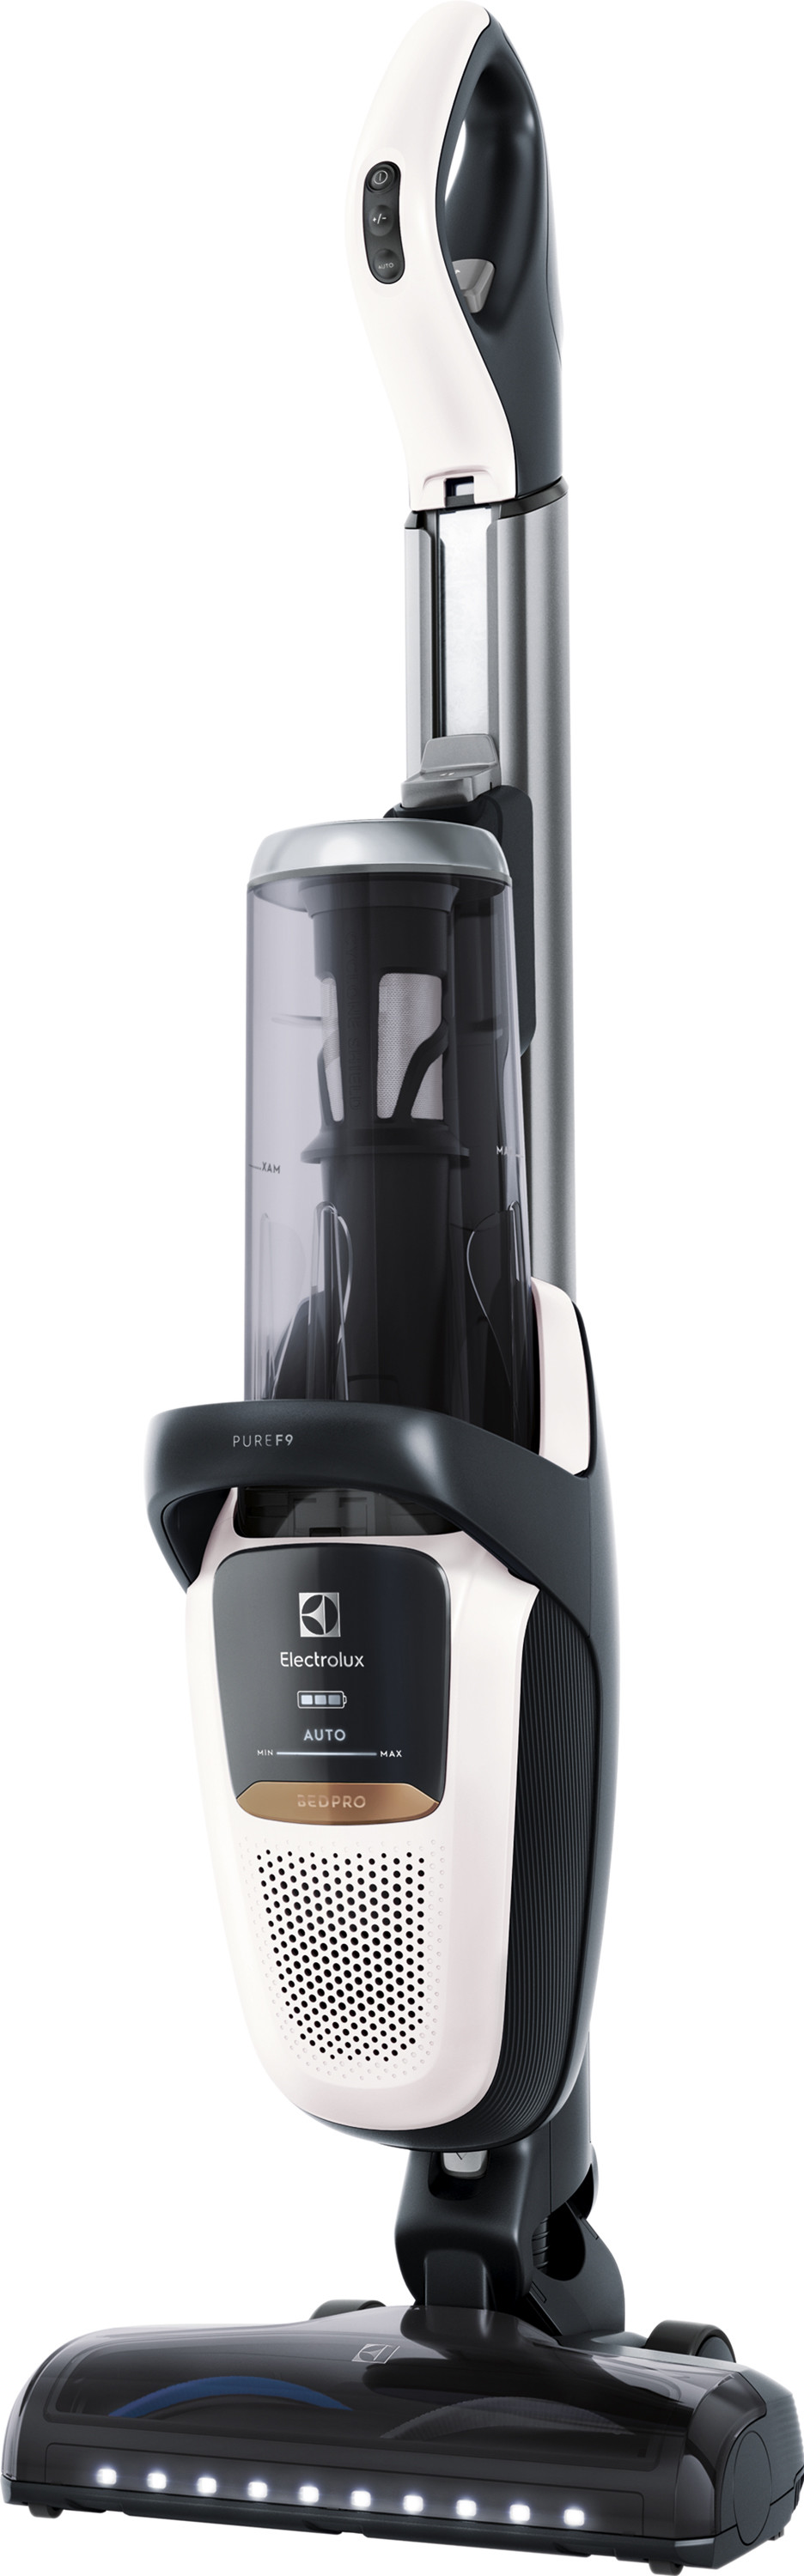 Electrolux Pure Allergy PF91